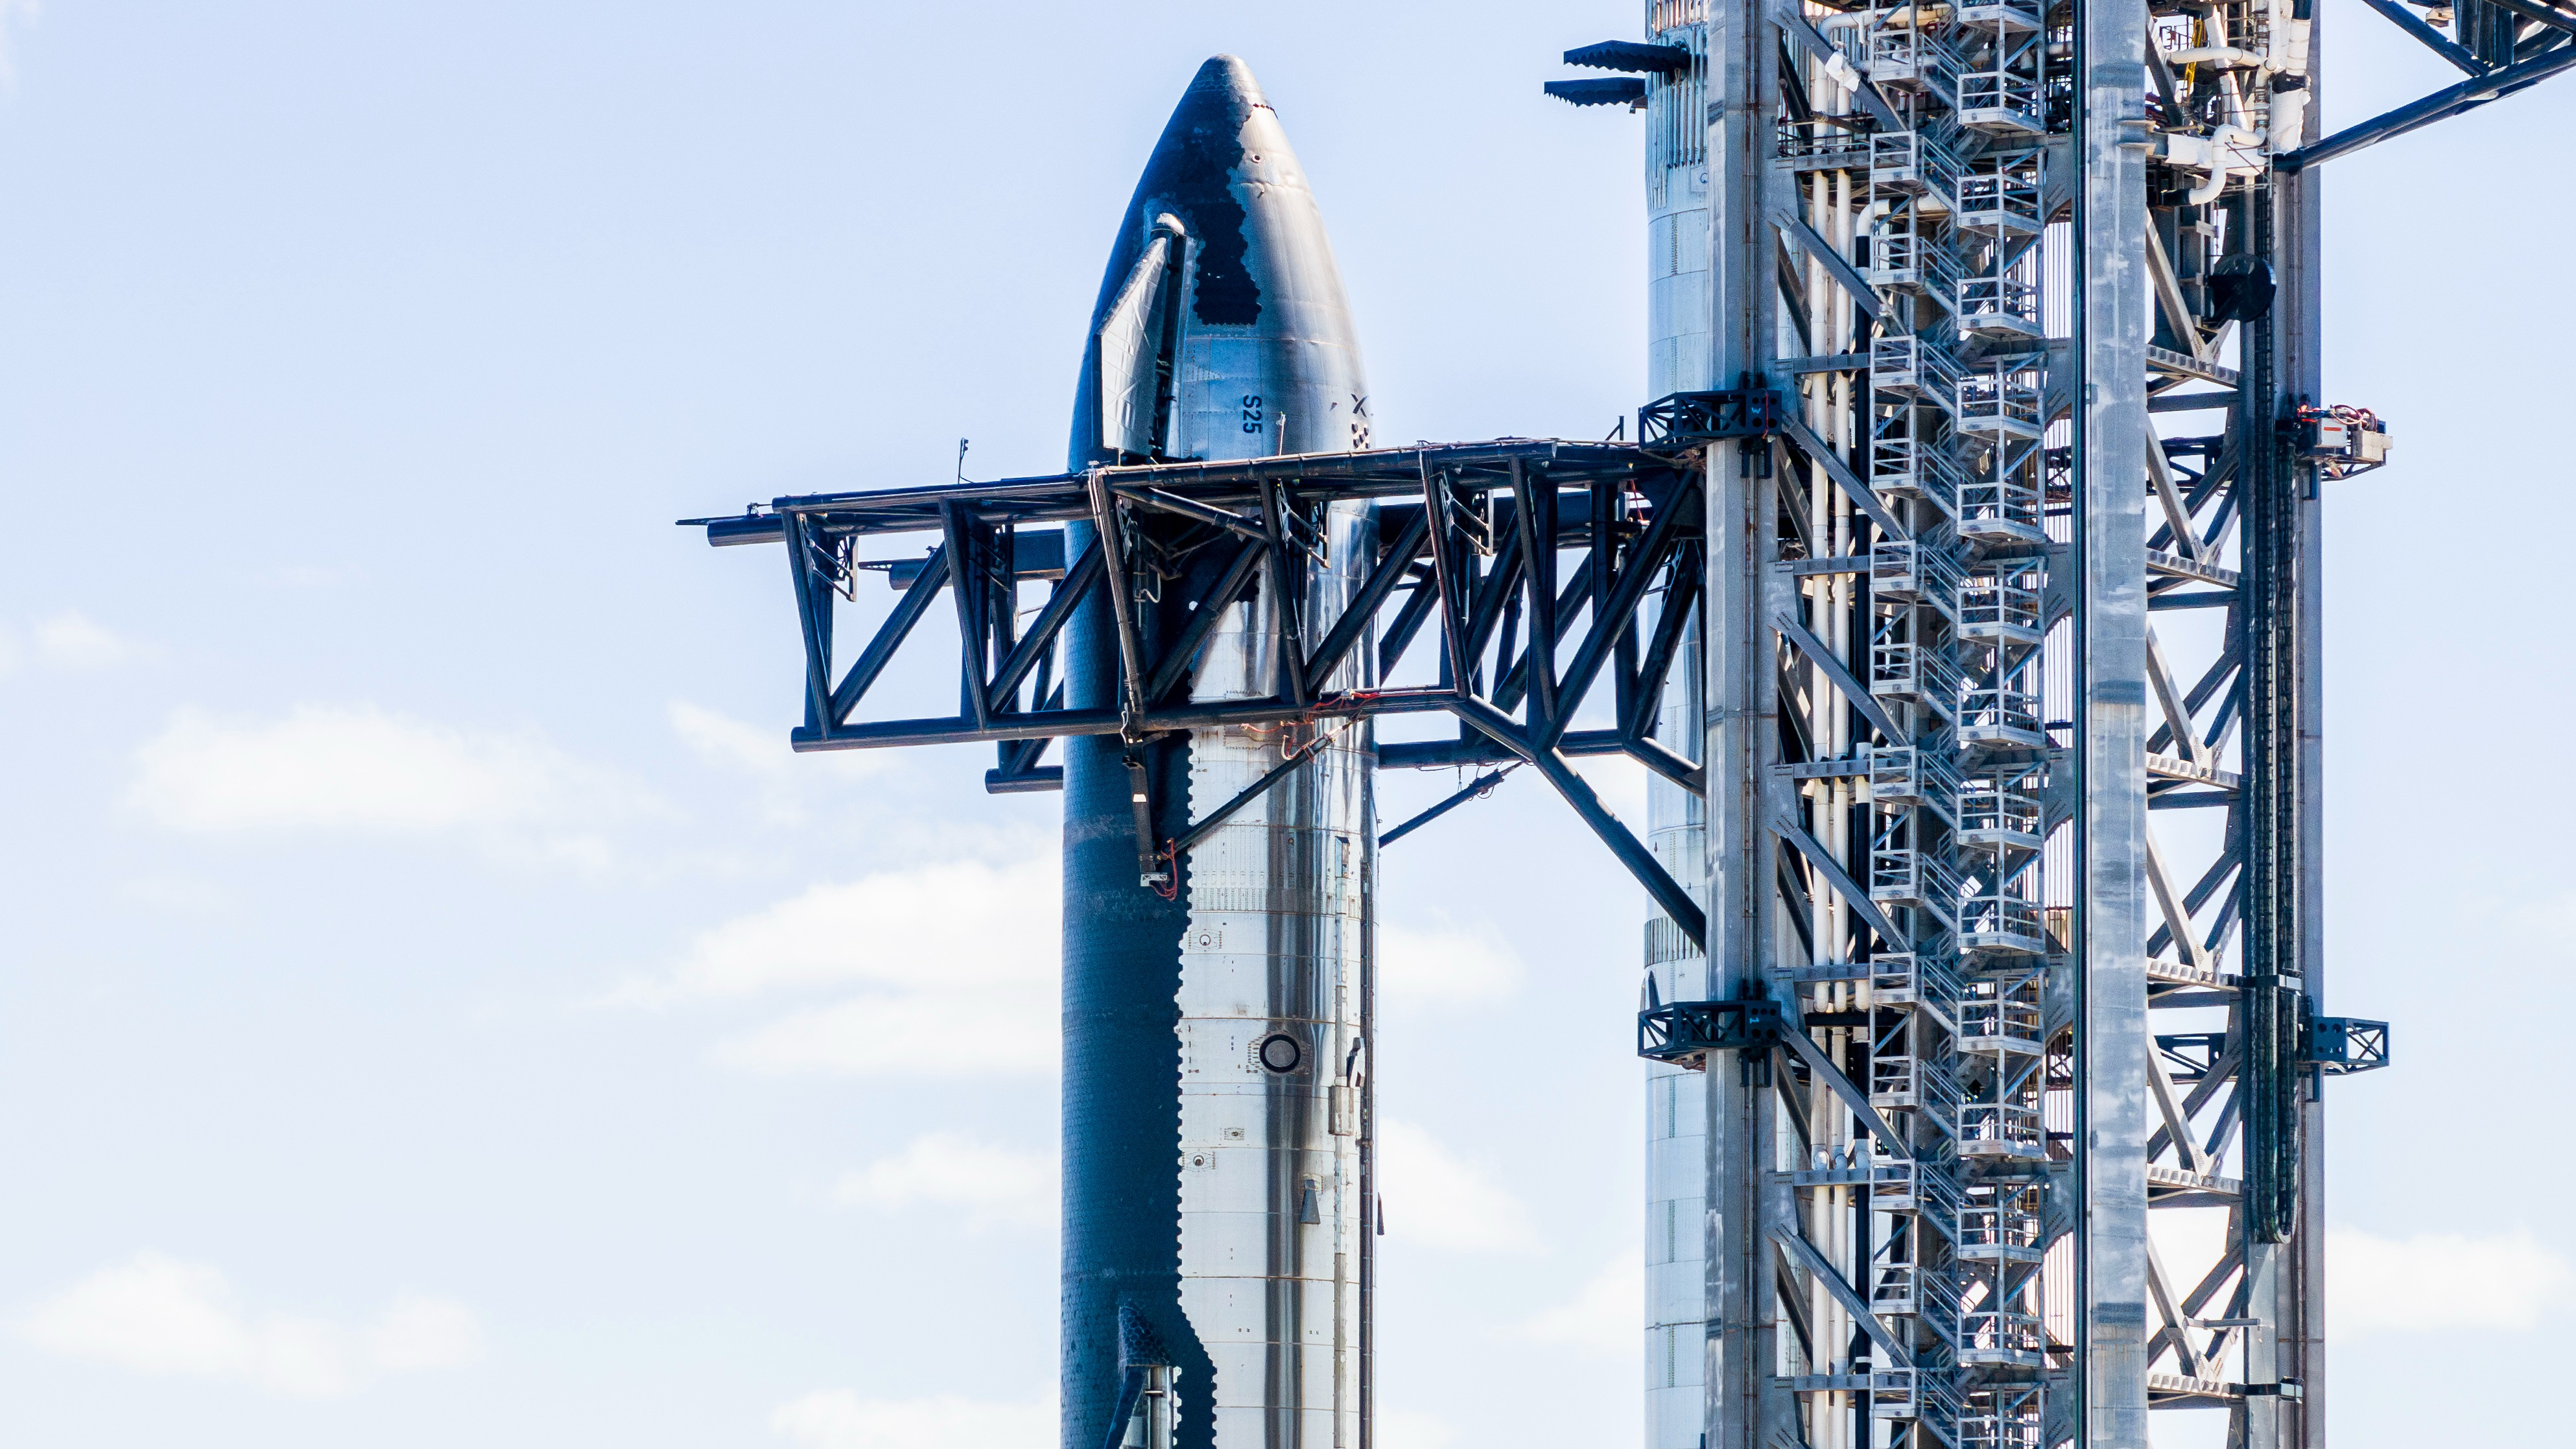 a shiny silver rocket is held by the arms of its gray launch tower.